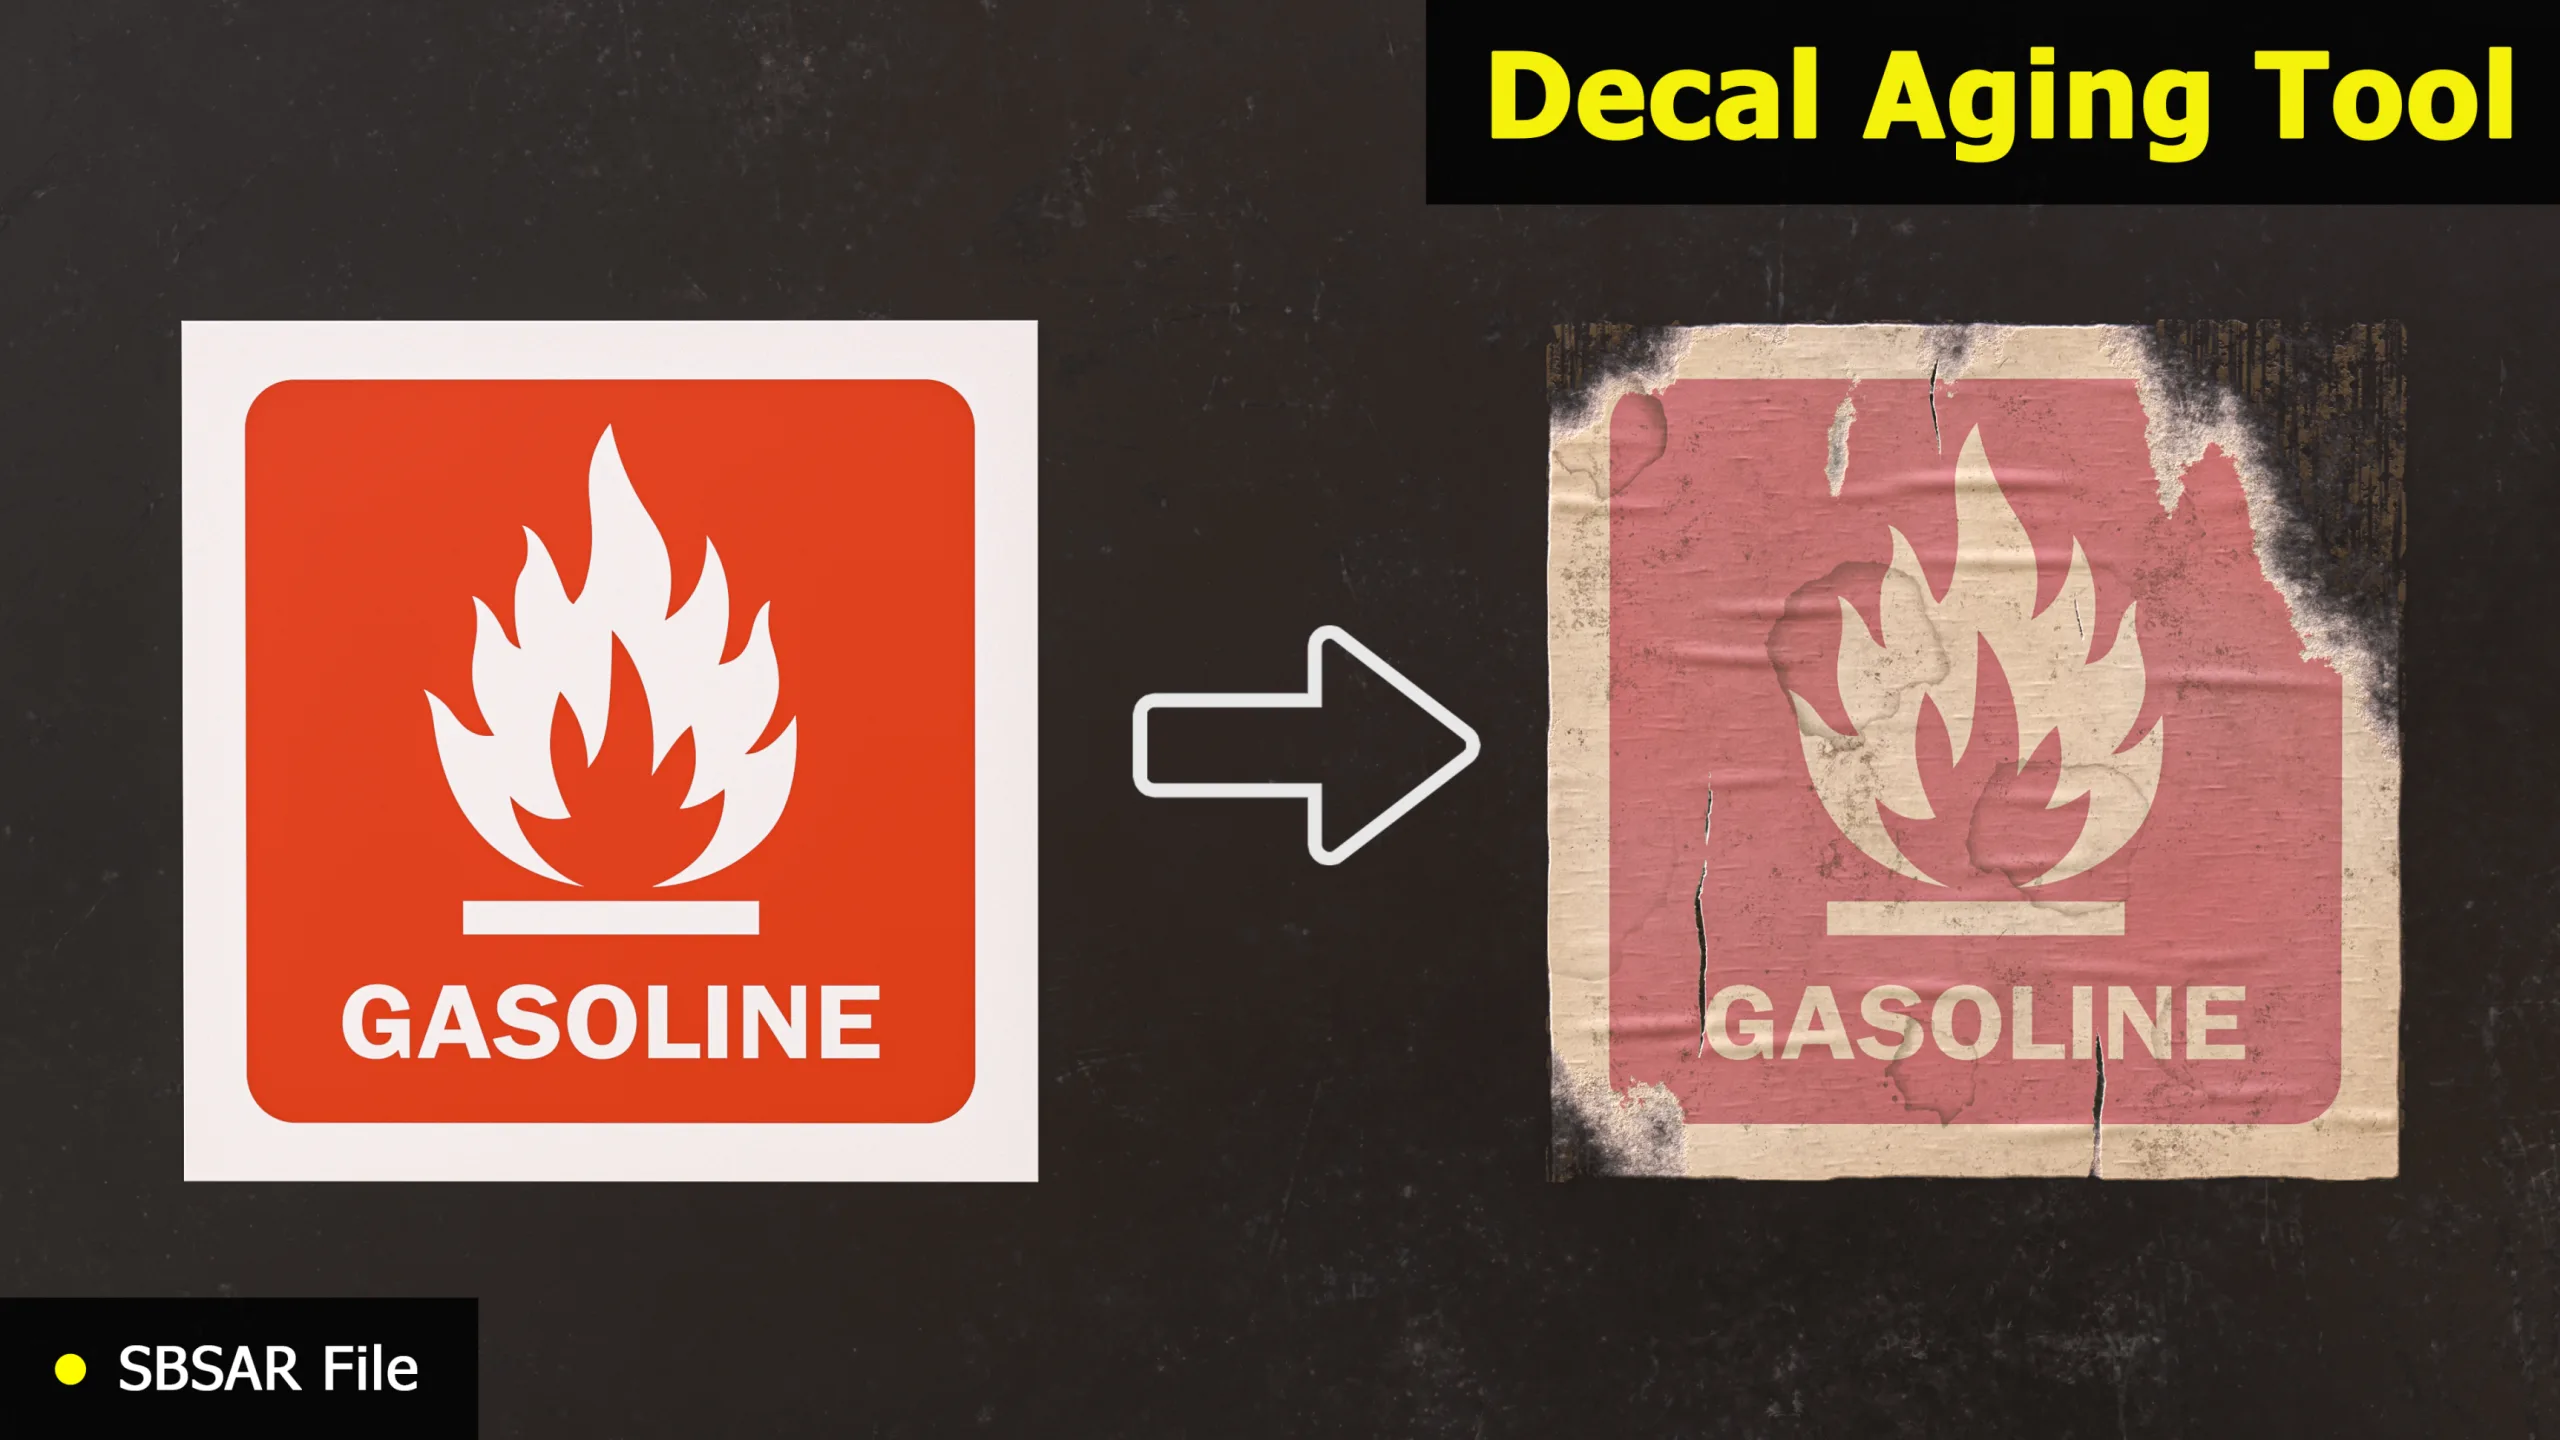 Decal Aging Tool